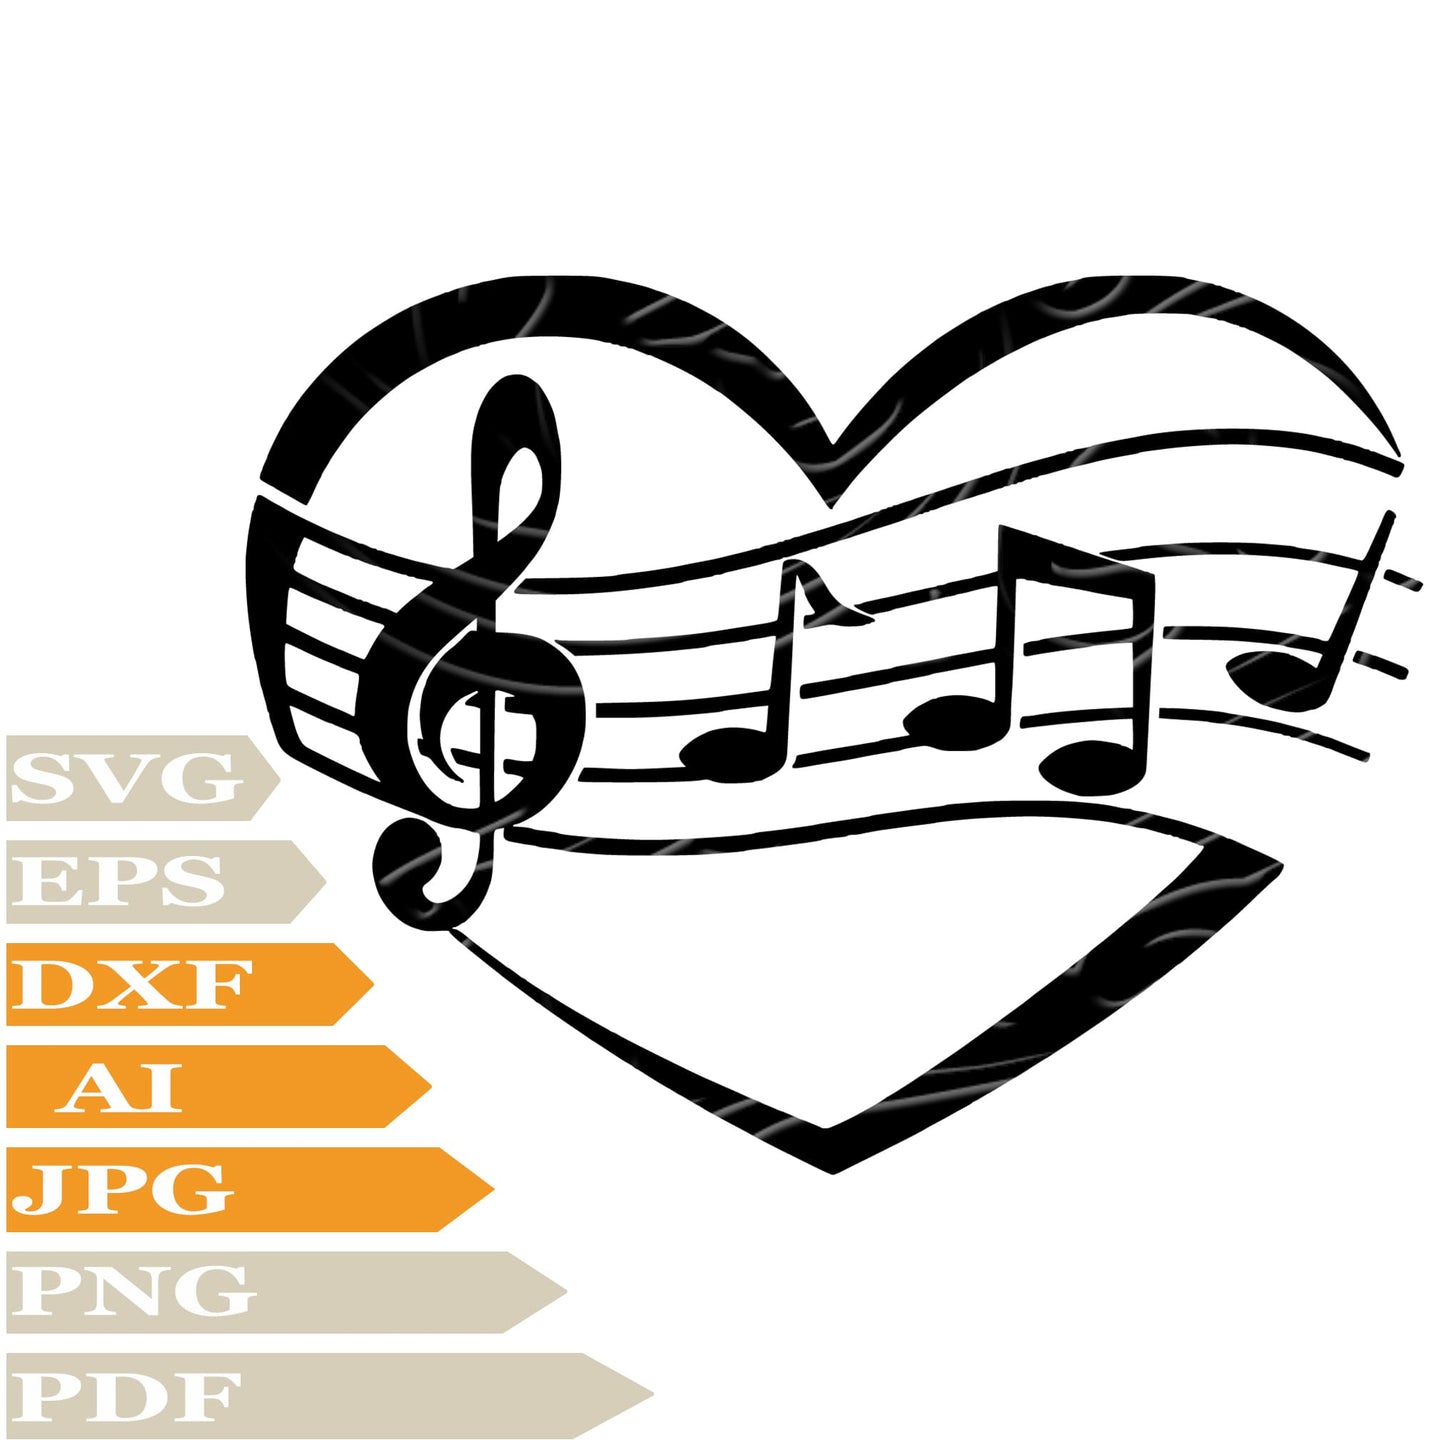 Heart SVG-Music Heart Personalized SVG-Heart Music Notes Drawing SVG-Music Heart Vector Illustration-PNG-Decal-Cricut-Digital Files-Clip Art-Cut File-For Shirts-Silhouette